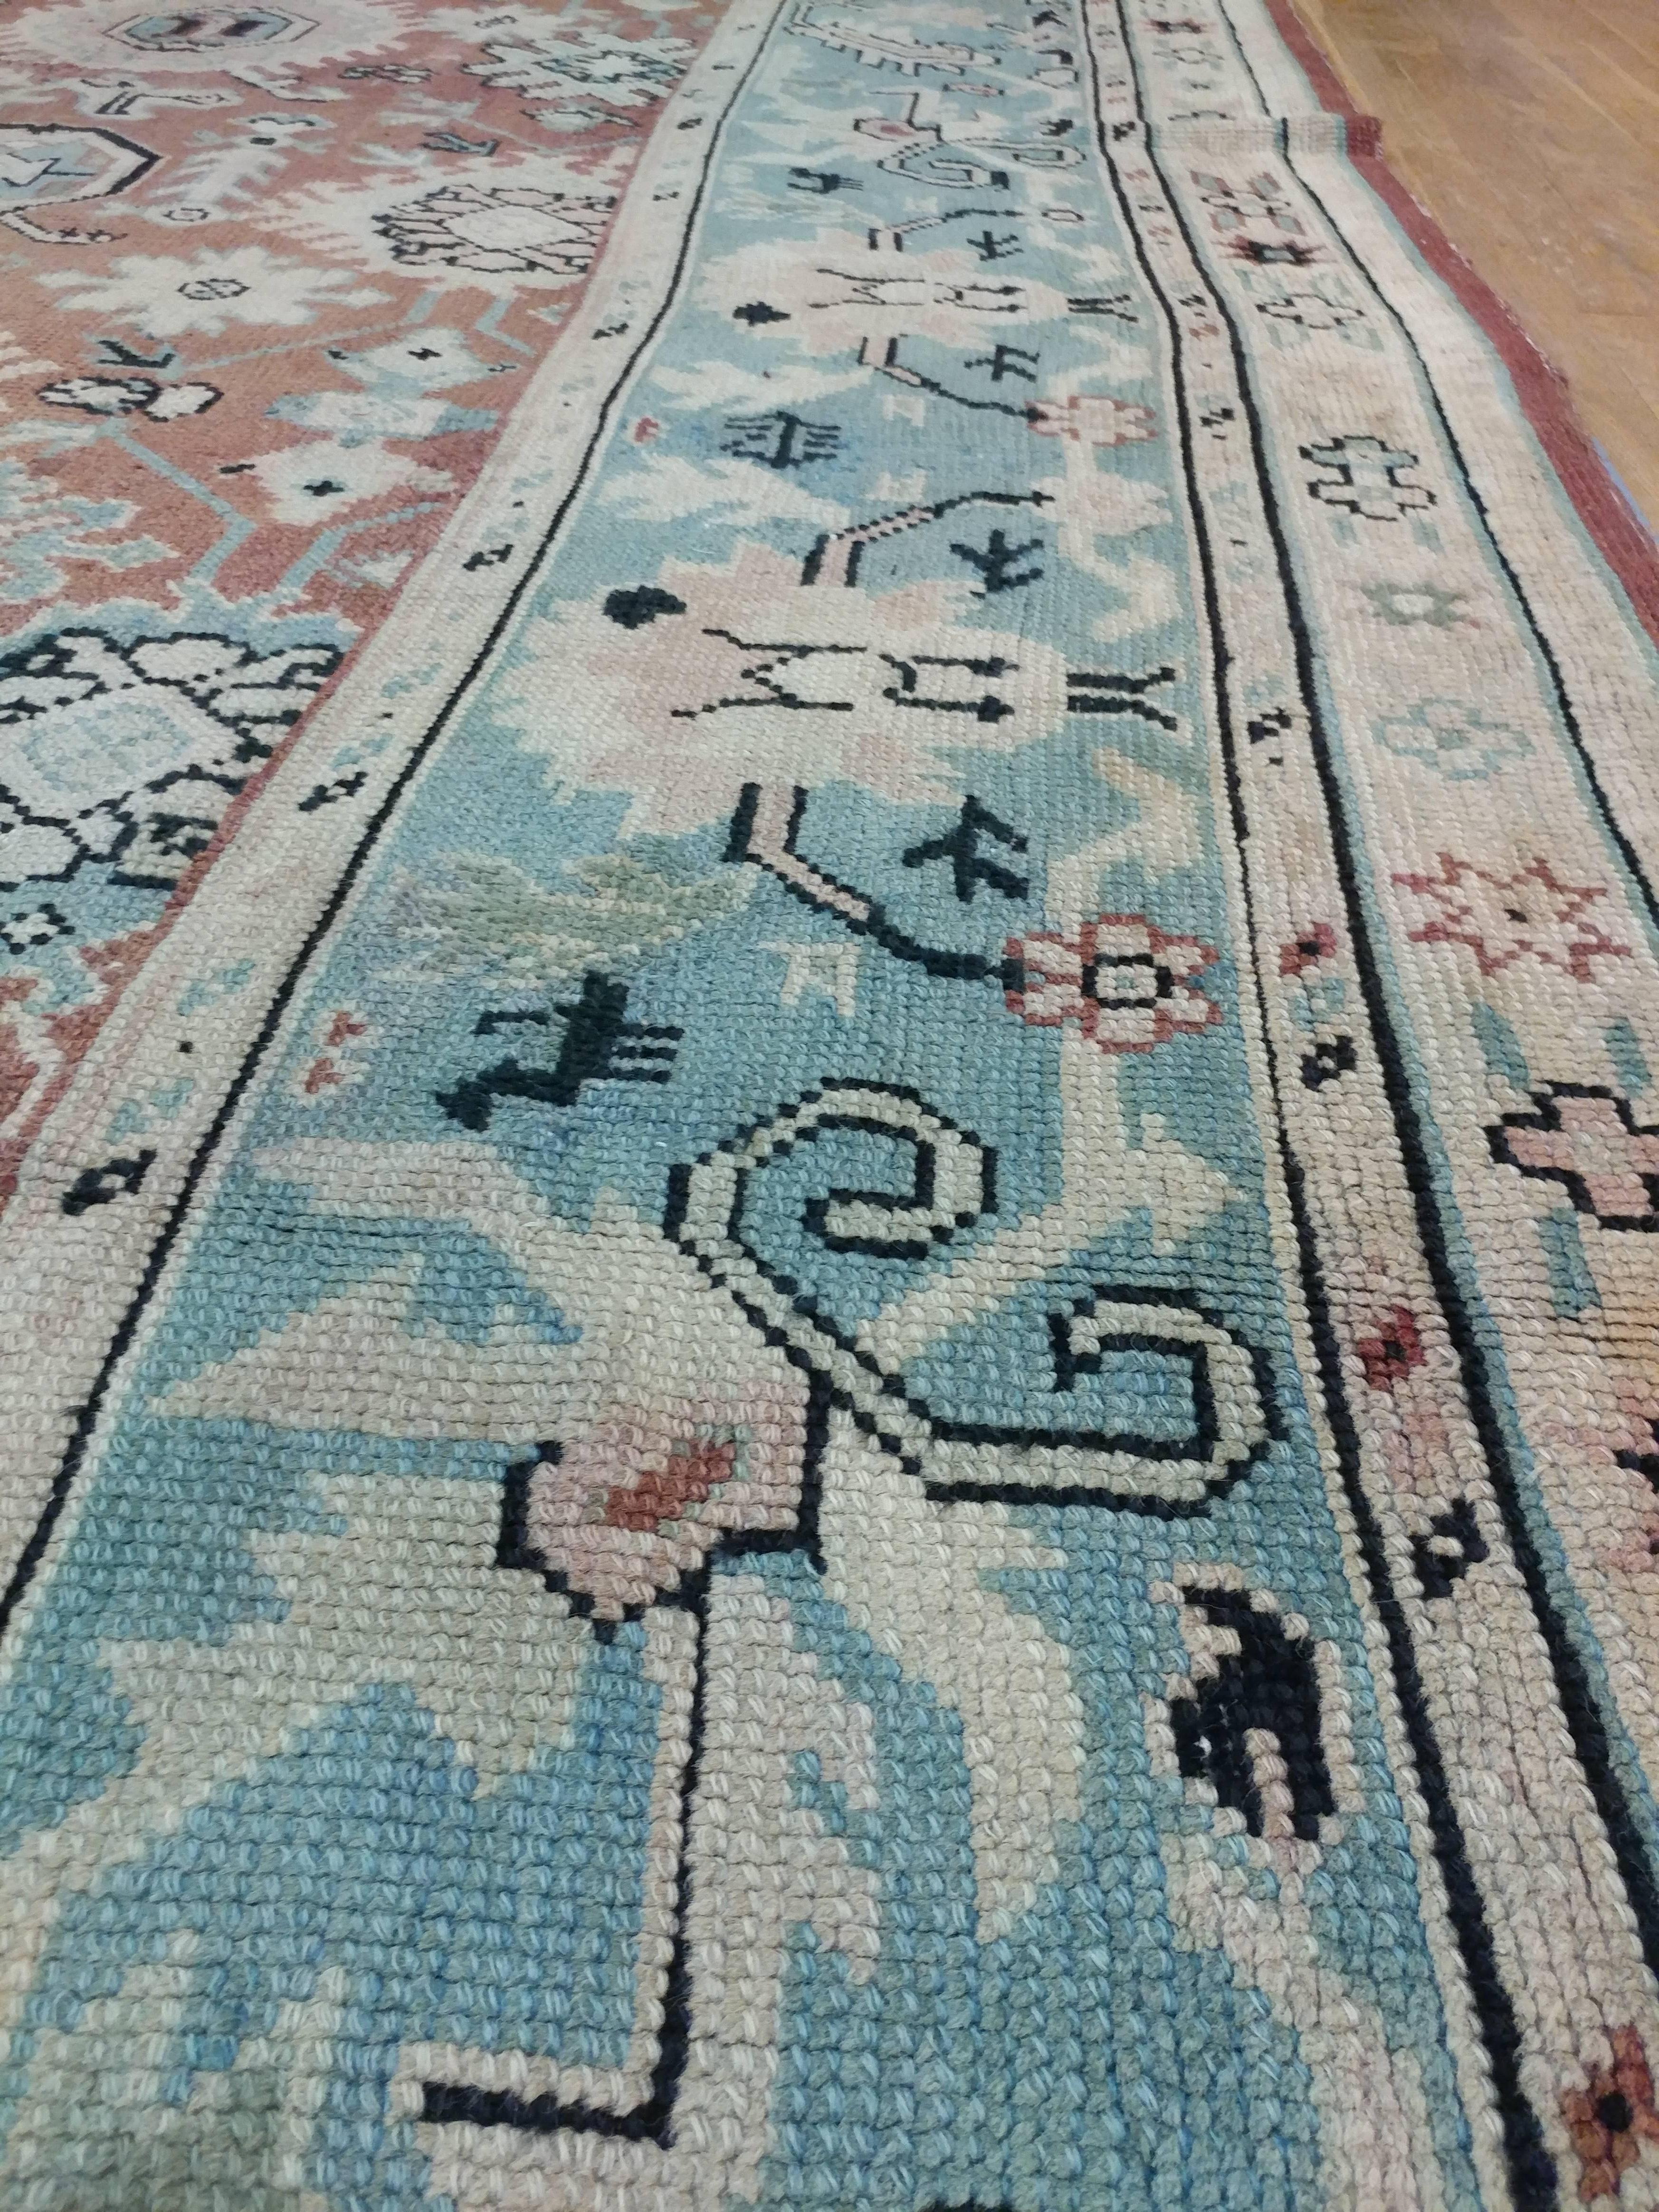 Antique Oushak Carpet, Red Carpet, Handmade Carpet, Turkish Carpet, Brown, Green In Good Condition For Sale In Port Washington, NY